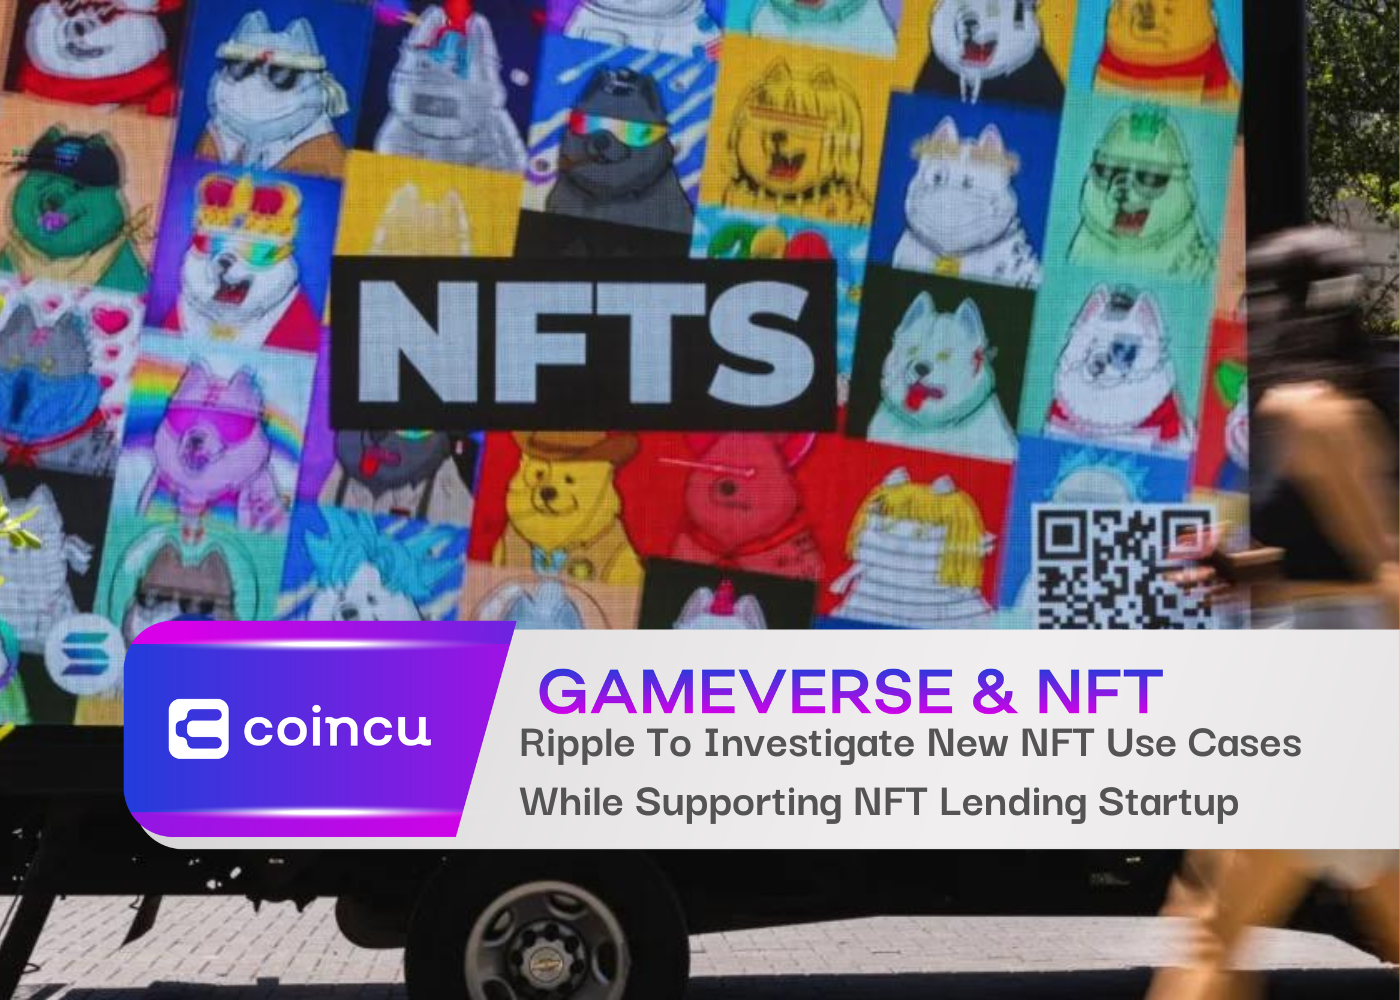 Ripple To Investigate New NFT Use Cases